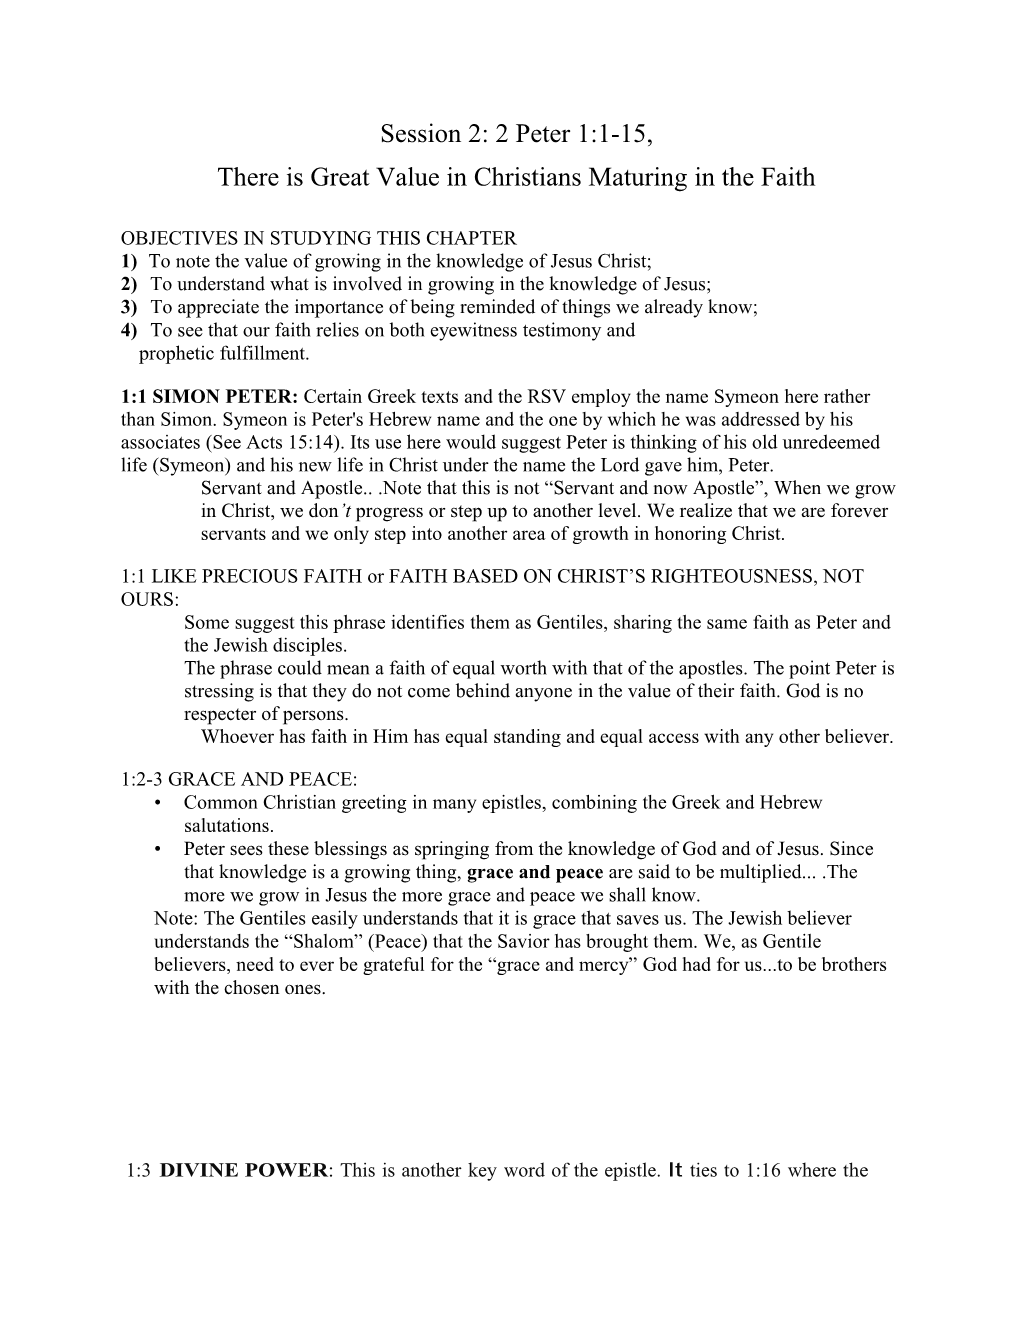 There Is Great Value in Christians Maturing in the Faith